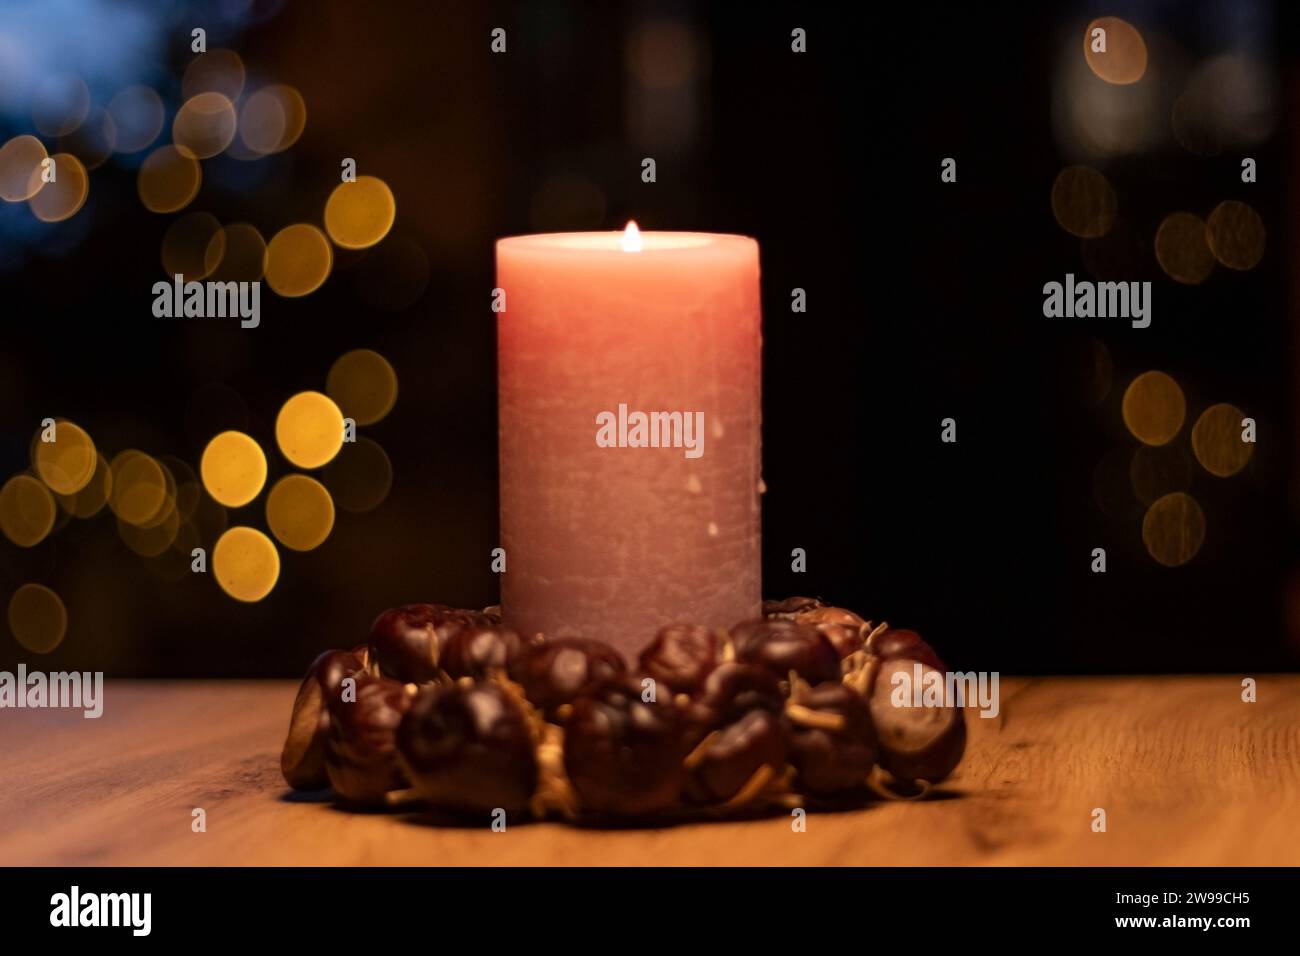 Christmas candle with ring of chestnuts on brown tabel and christmas tree in background bokeh with blurred lights Stock Photo